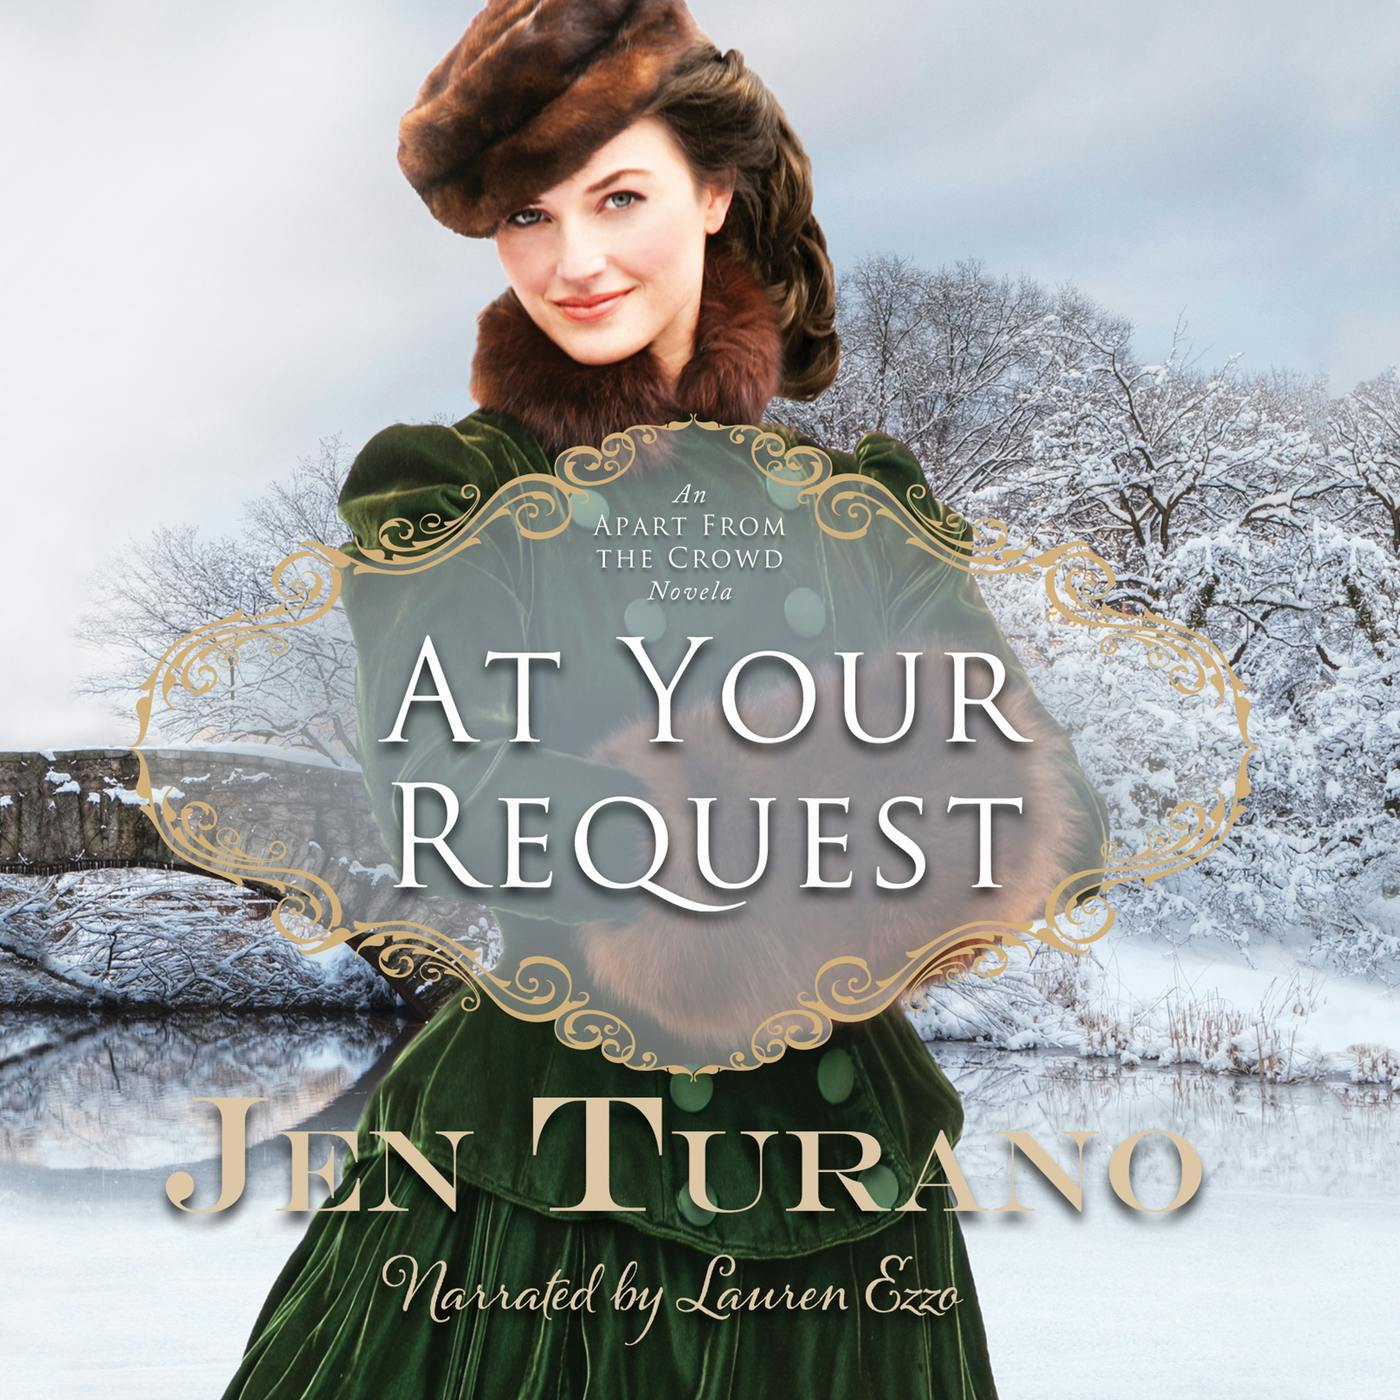 Apart From the Crowd, 0.5: At Your Request (Unabridged) - Jen Turano